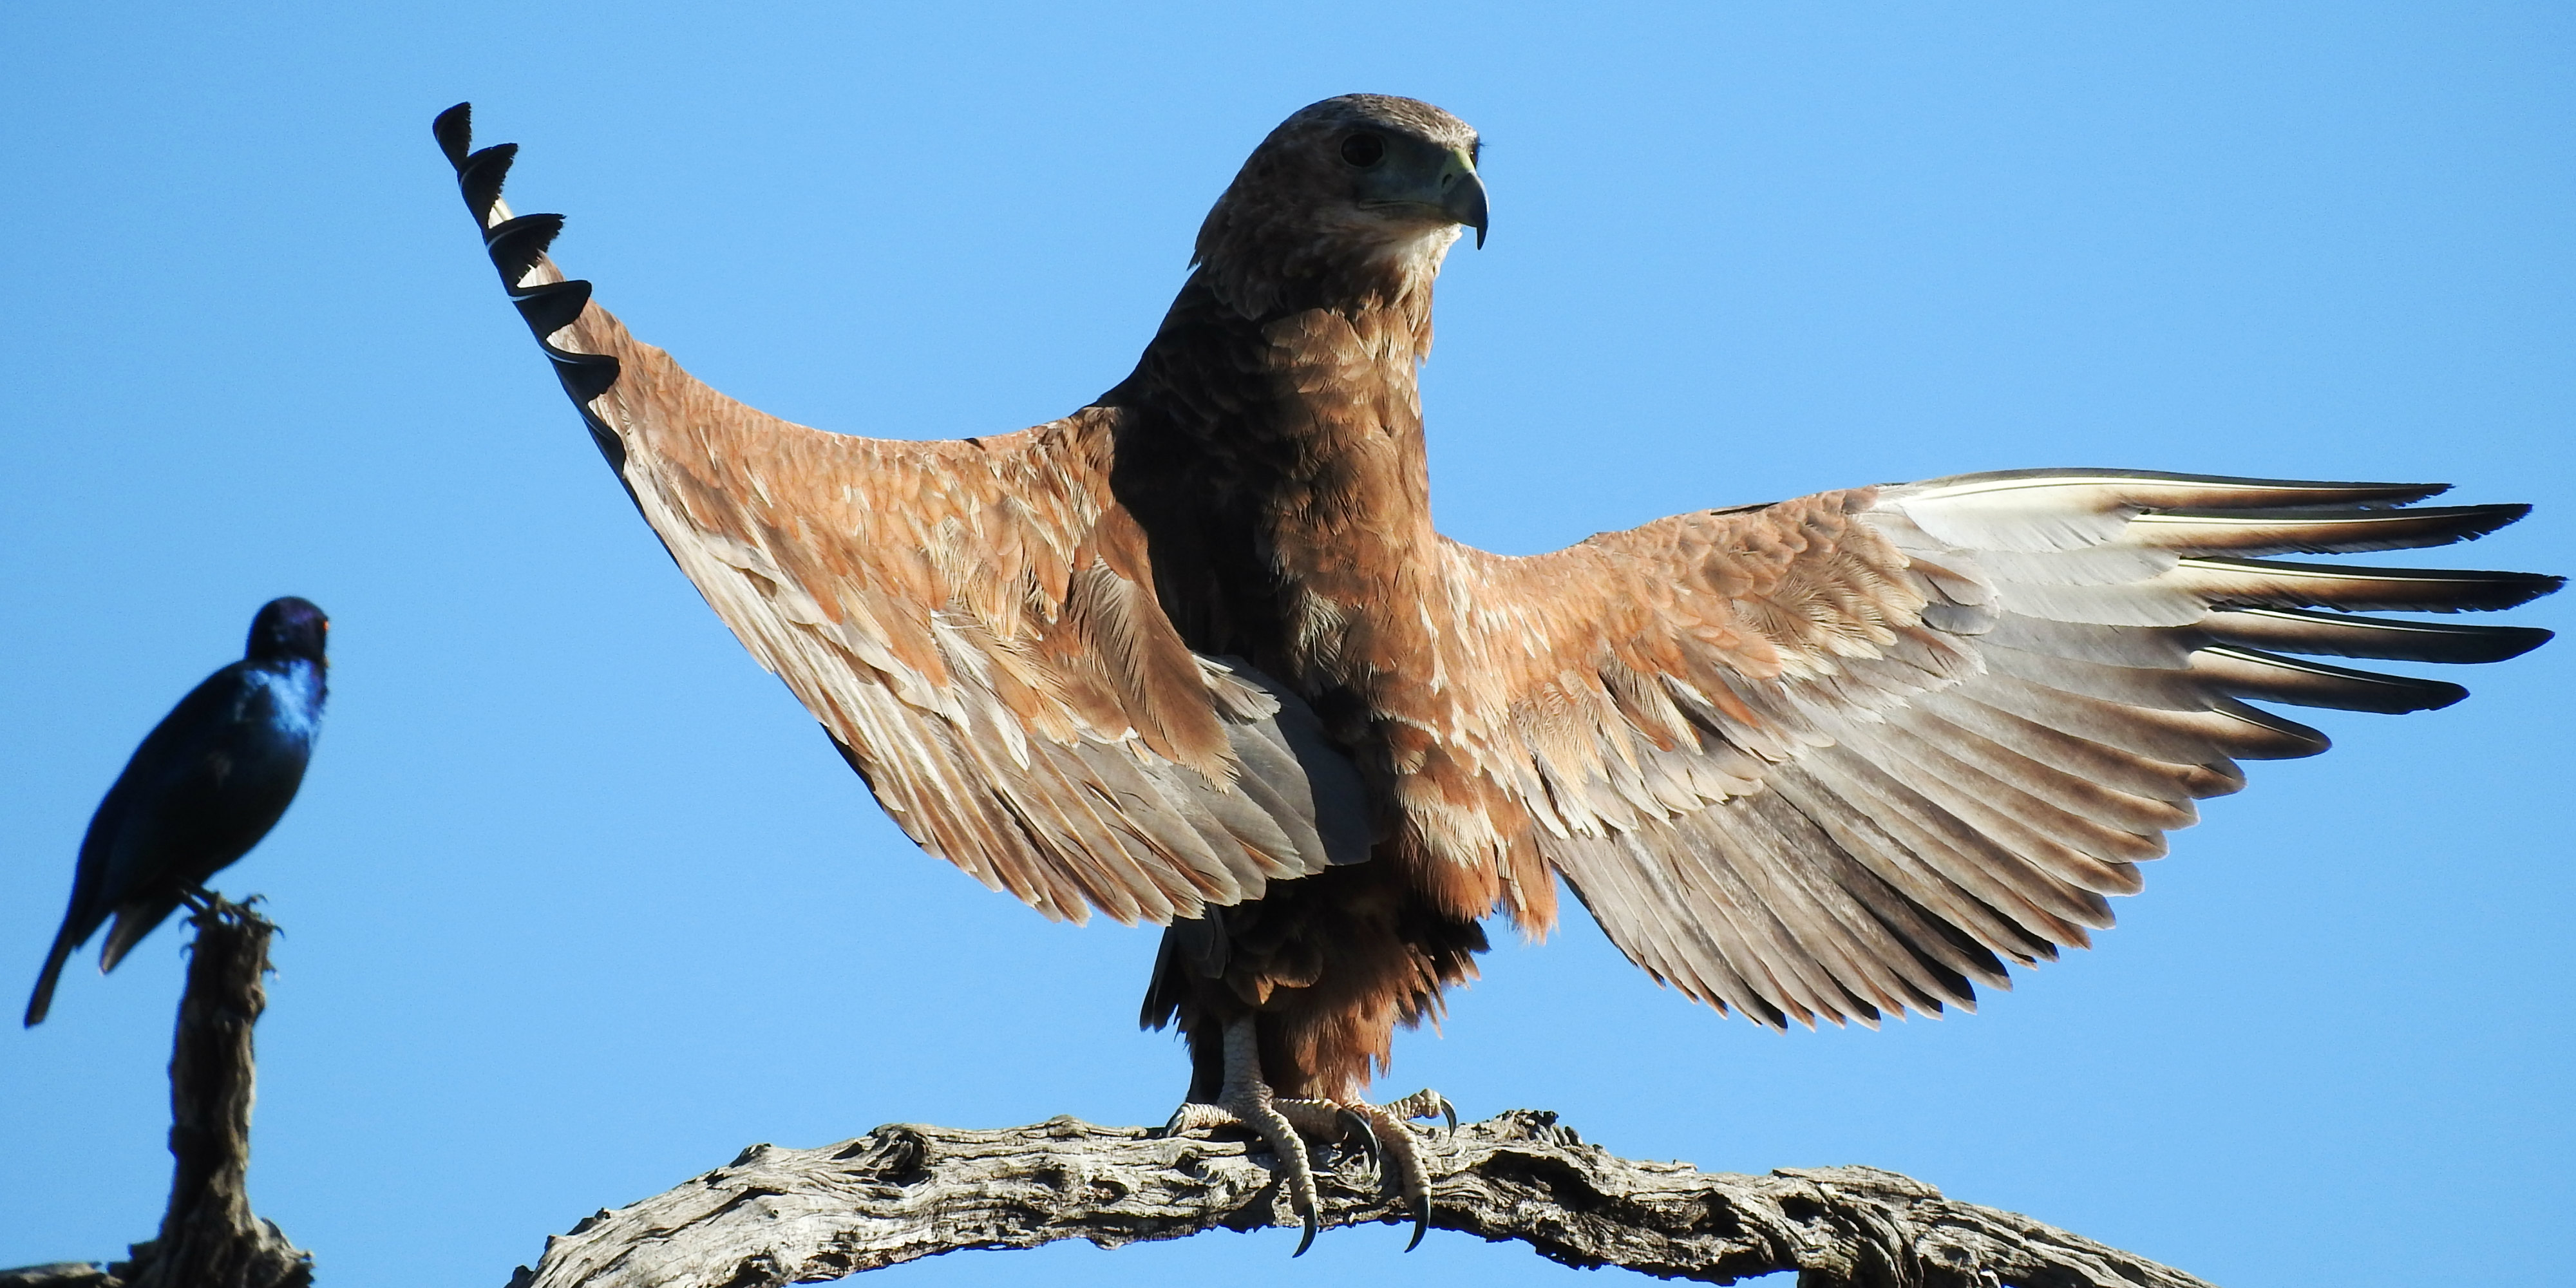 An Africa animal volunteer captures an image of a mighty eagle, as it spreads its wings.